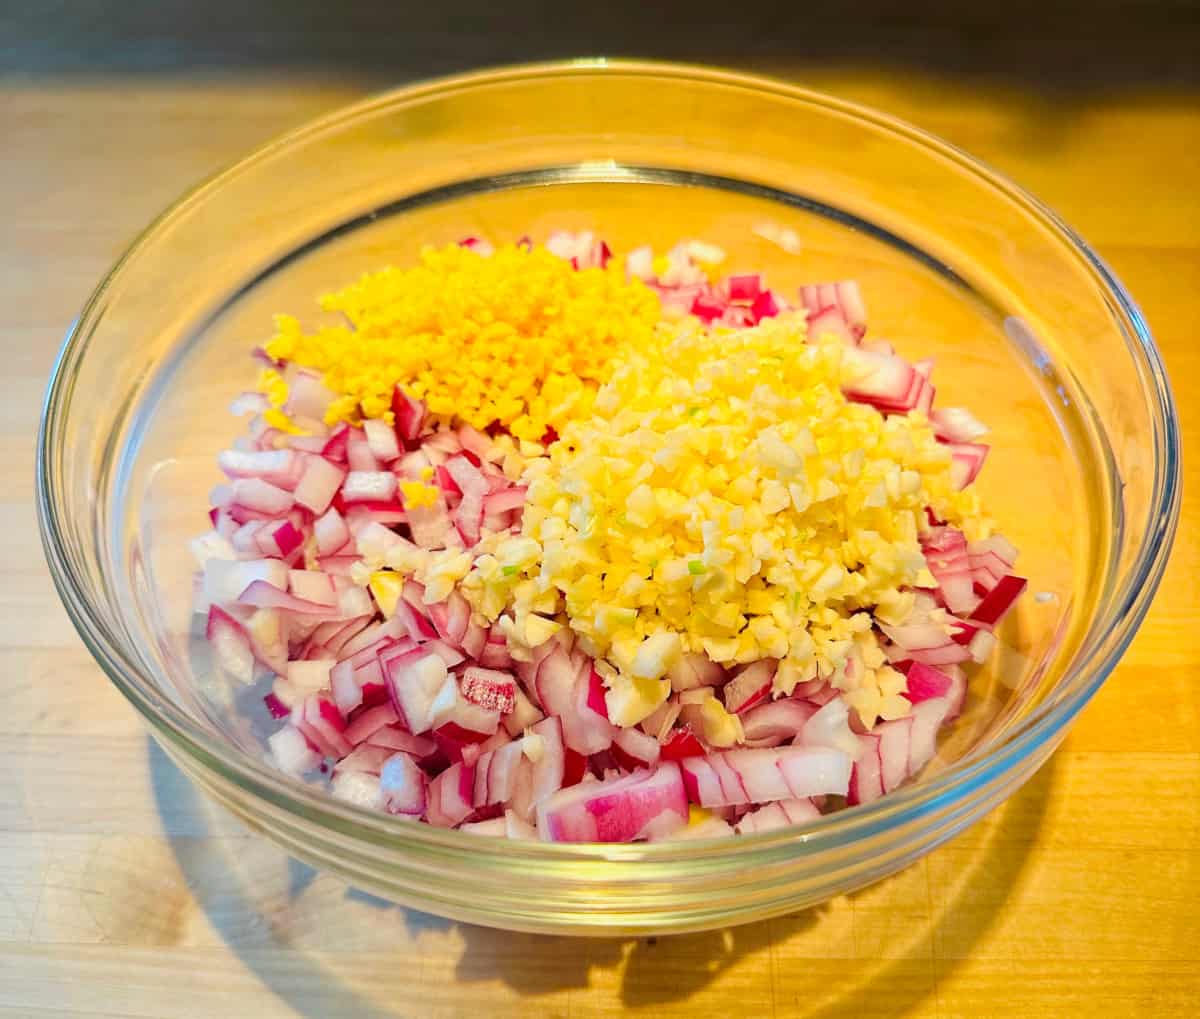 Diced red onion with minced garlic and ginger in a glass bowl.